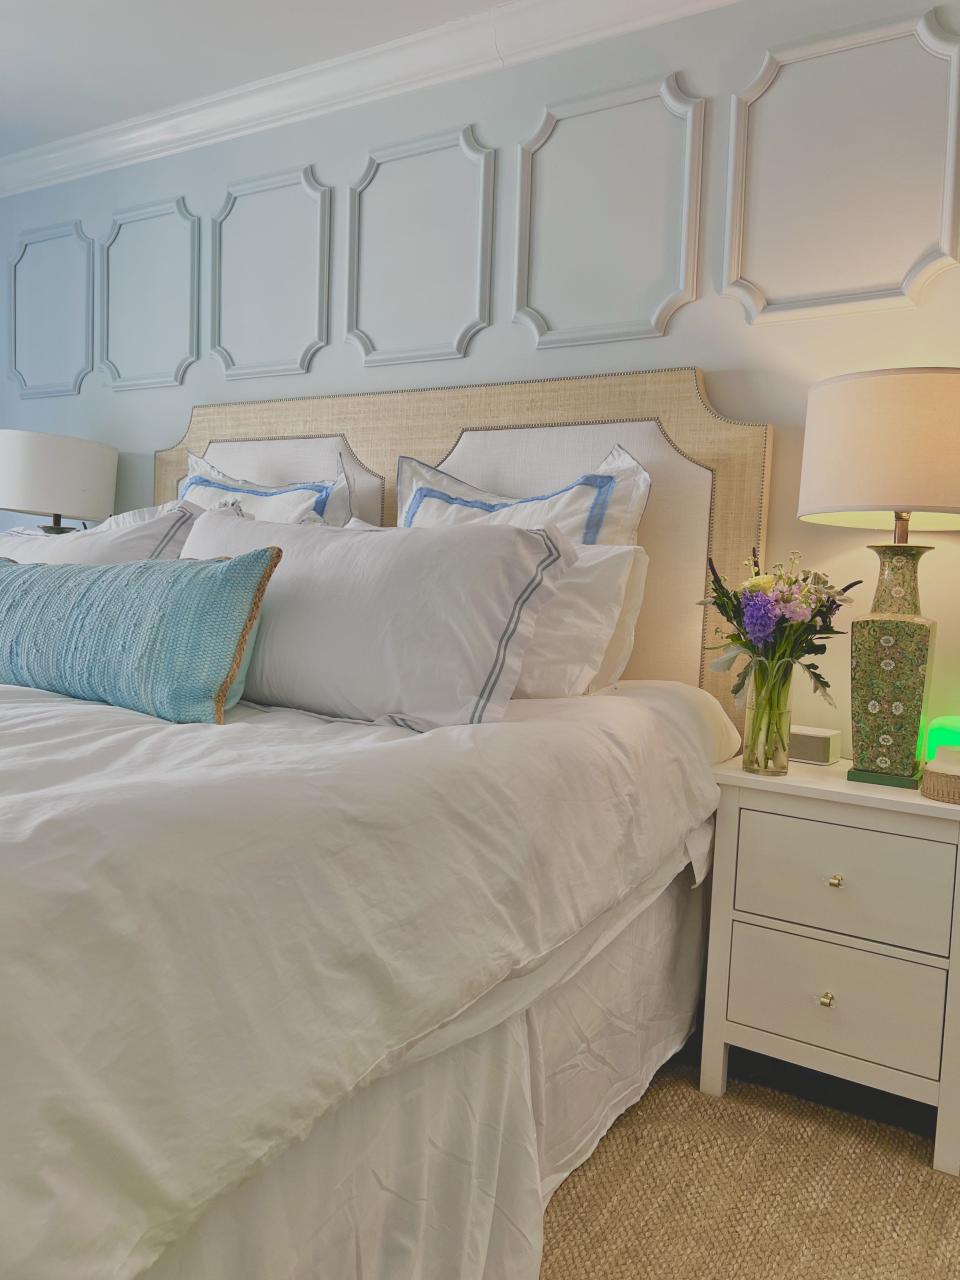 Peel and stick molding in a bedroom redesigned by Clare Sullivan.